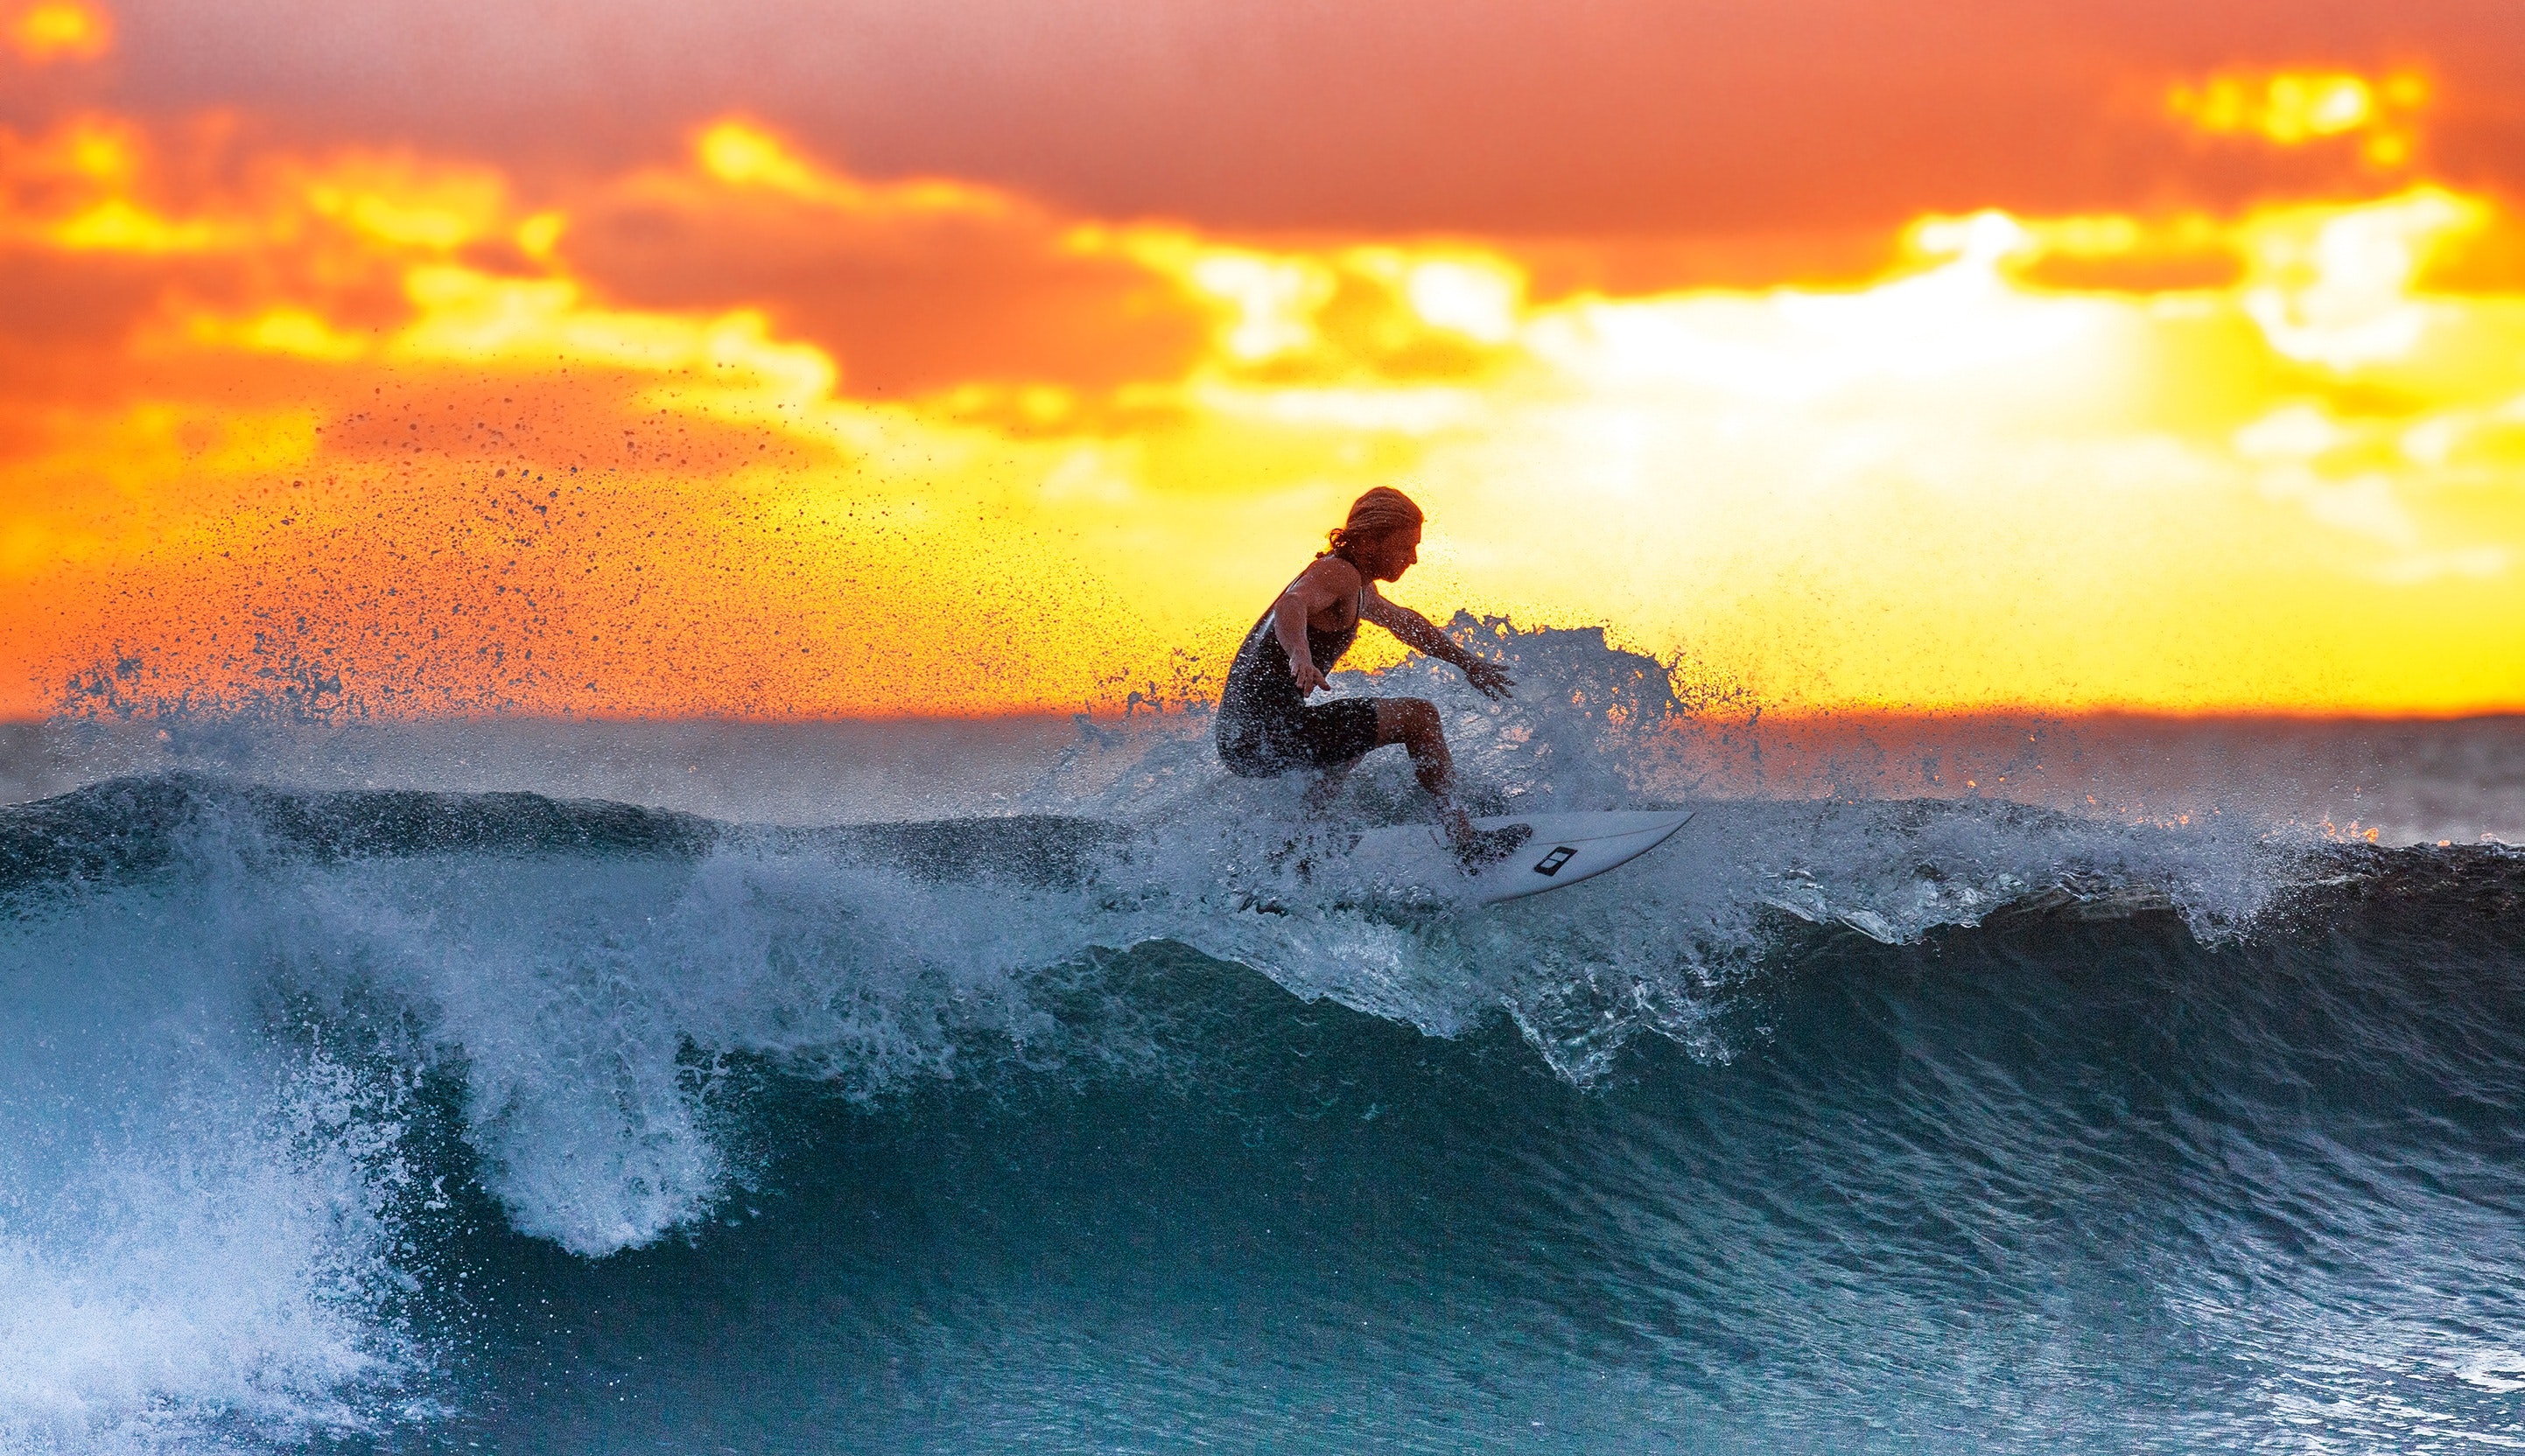 guy surfing in cornwall with sunset